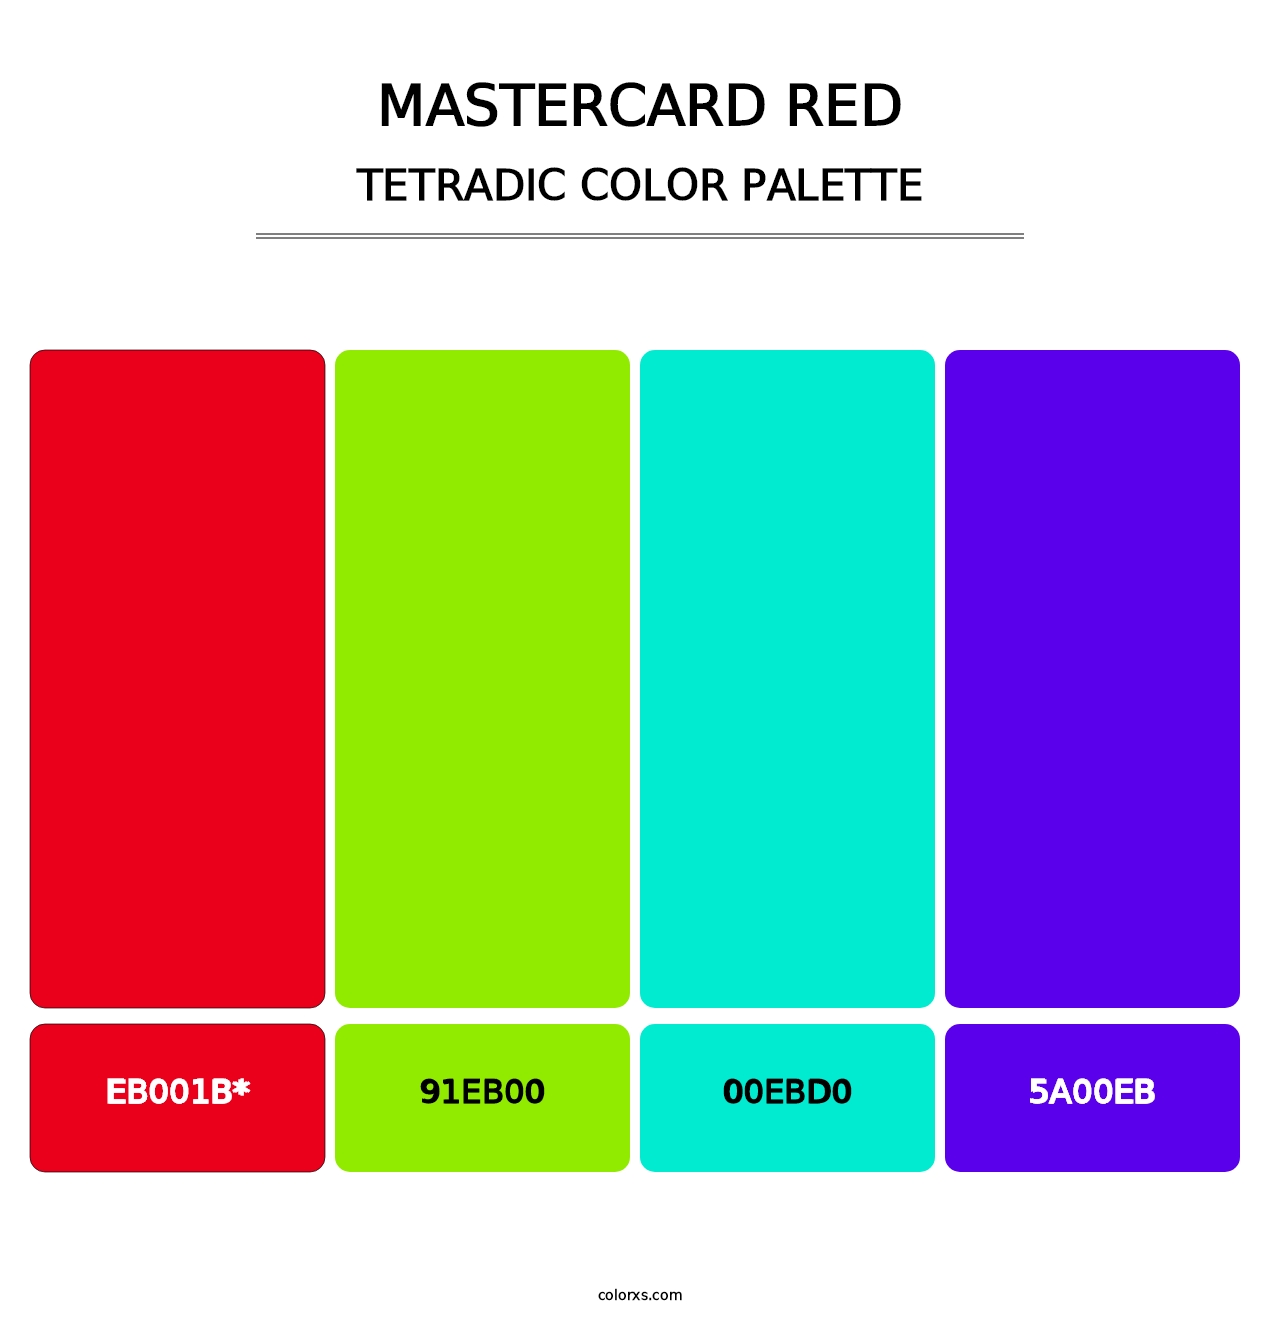 Mastercard Red - Tetradic Color Palette